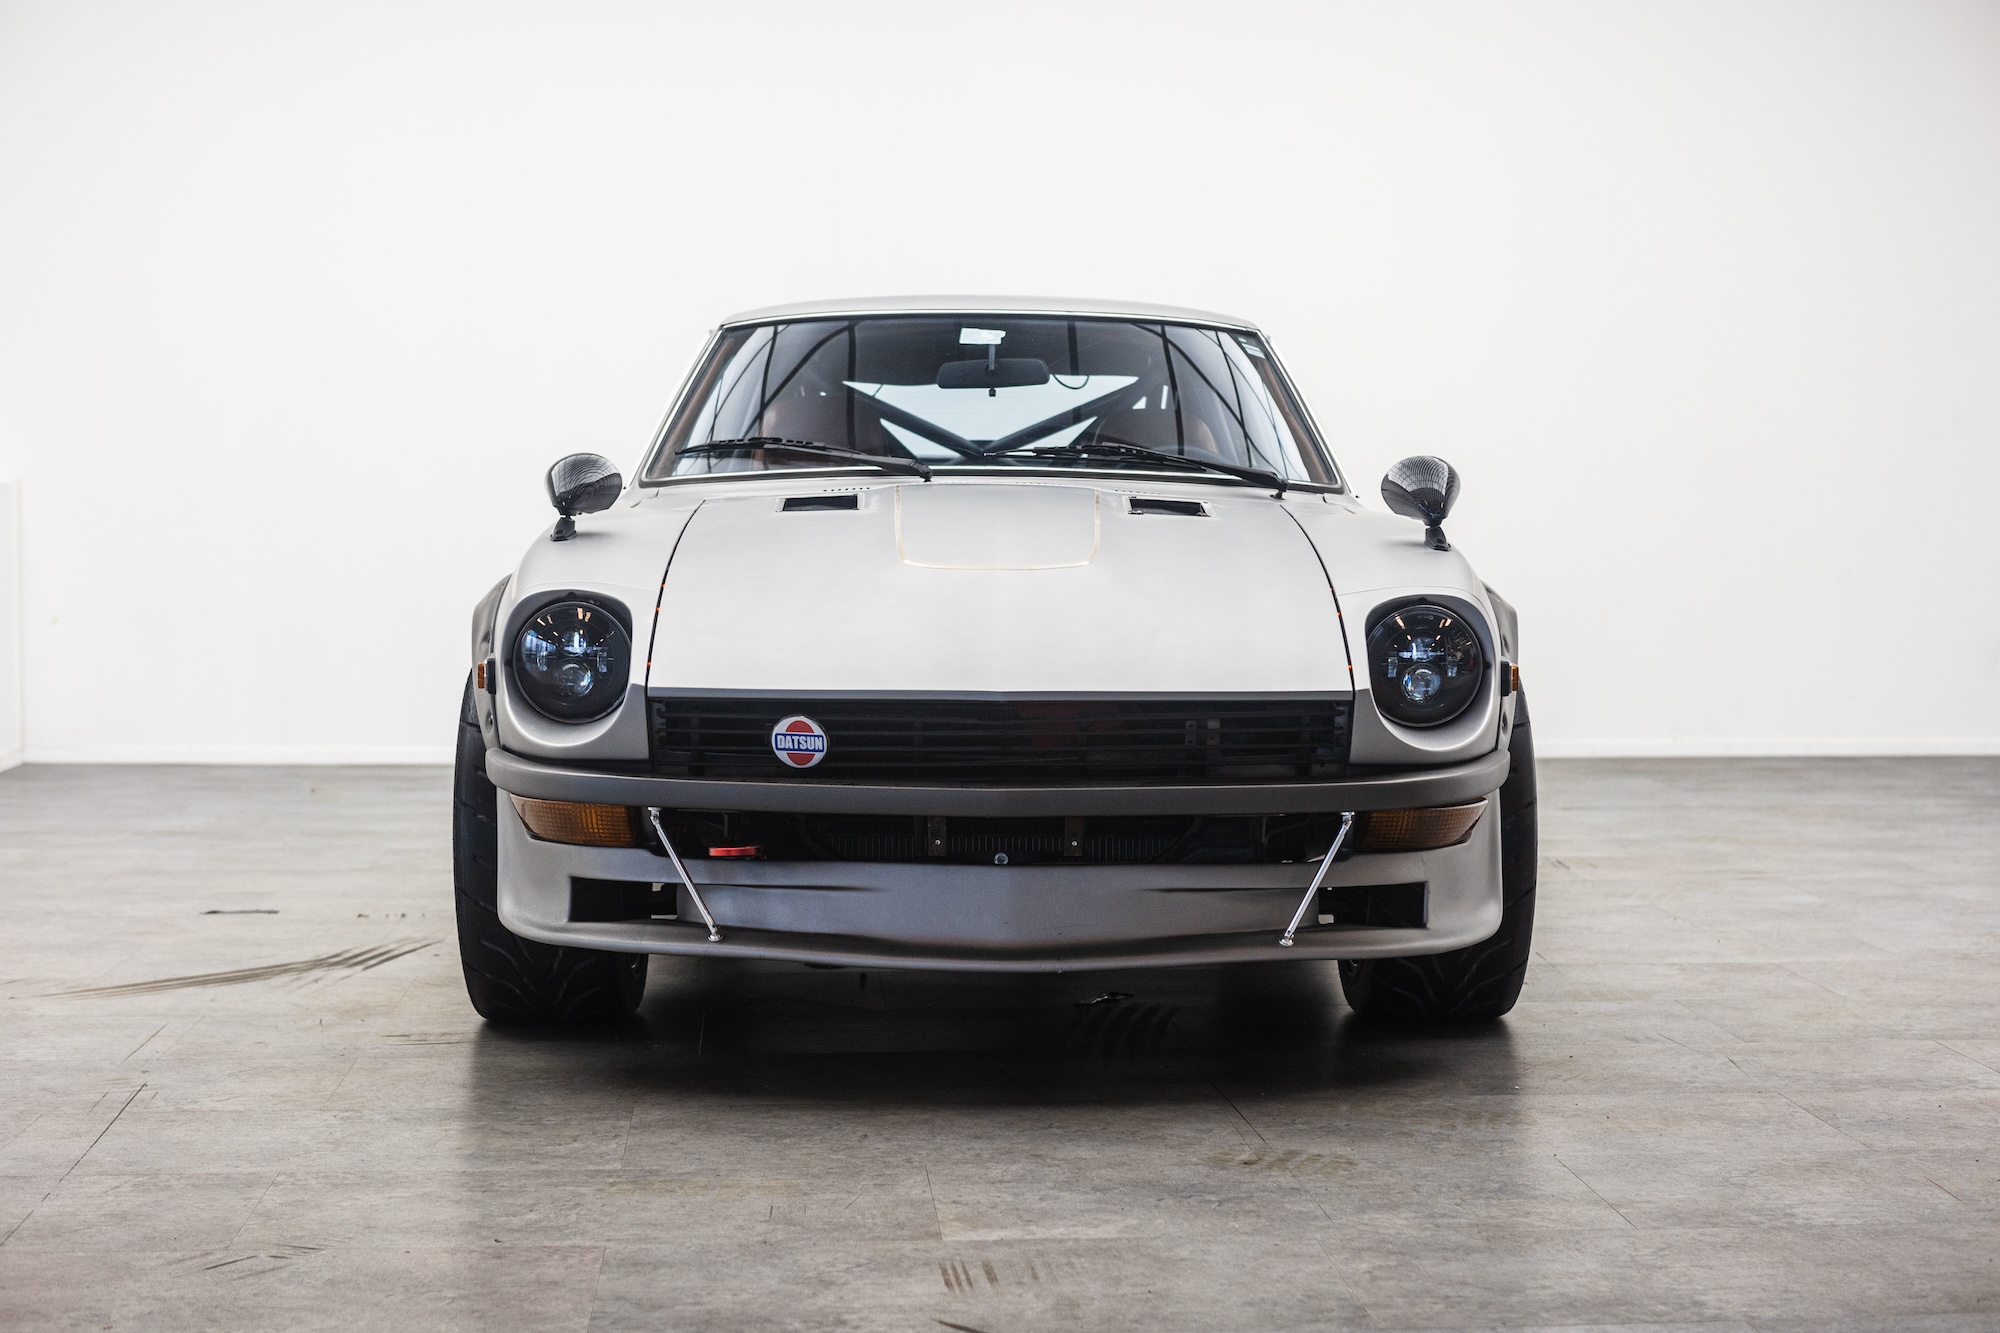 1976 Datsun 280Z for sale by auction in Almere, Netherlands